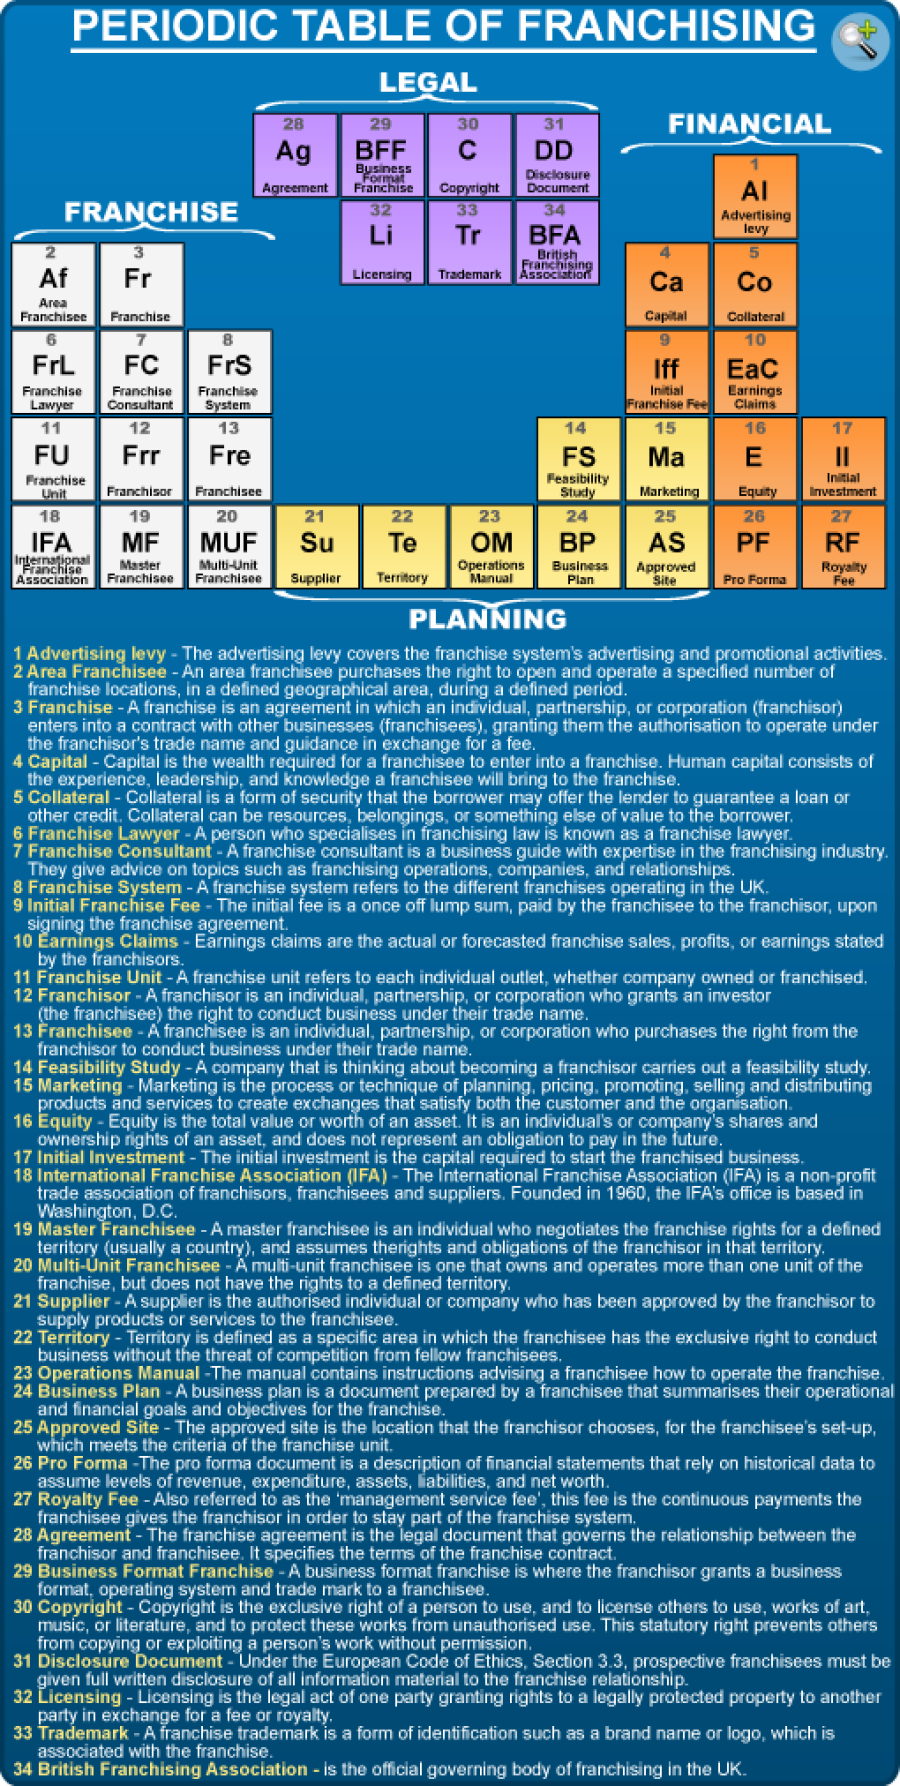 Infographic of Periodic Table of Franchising